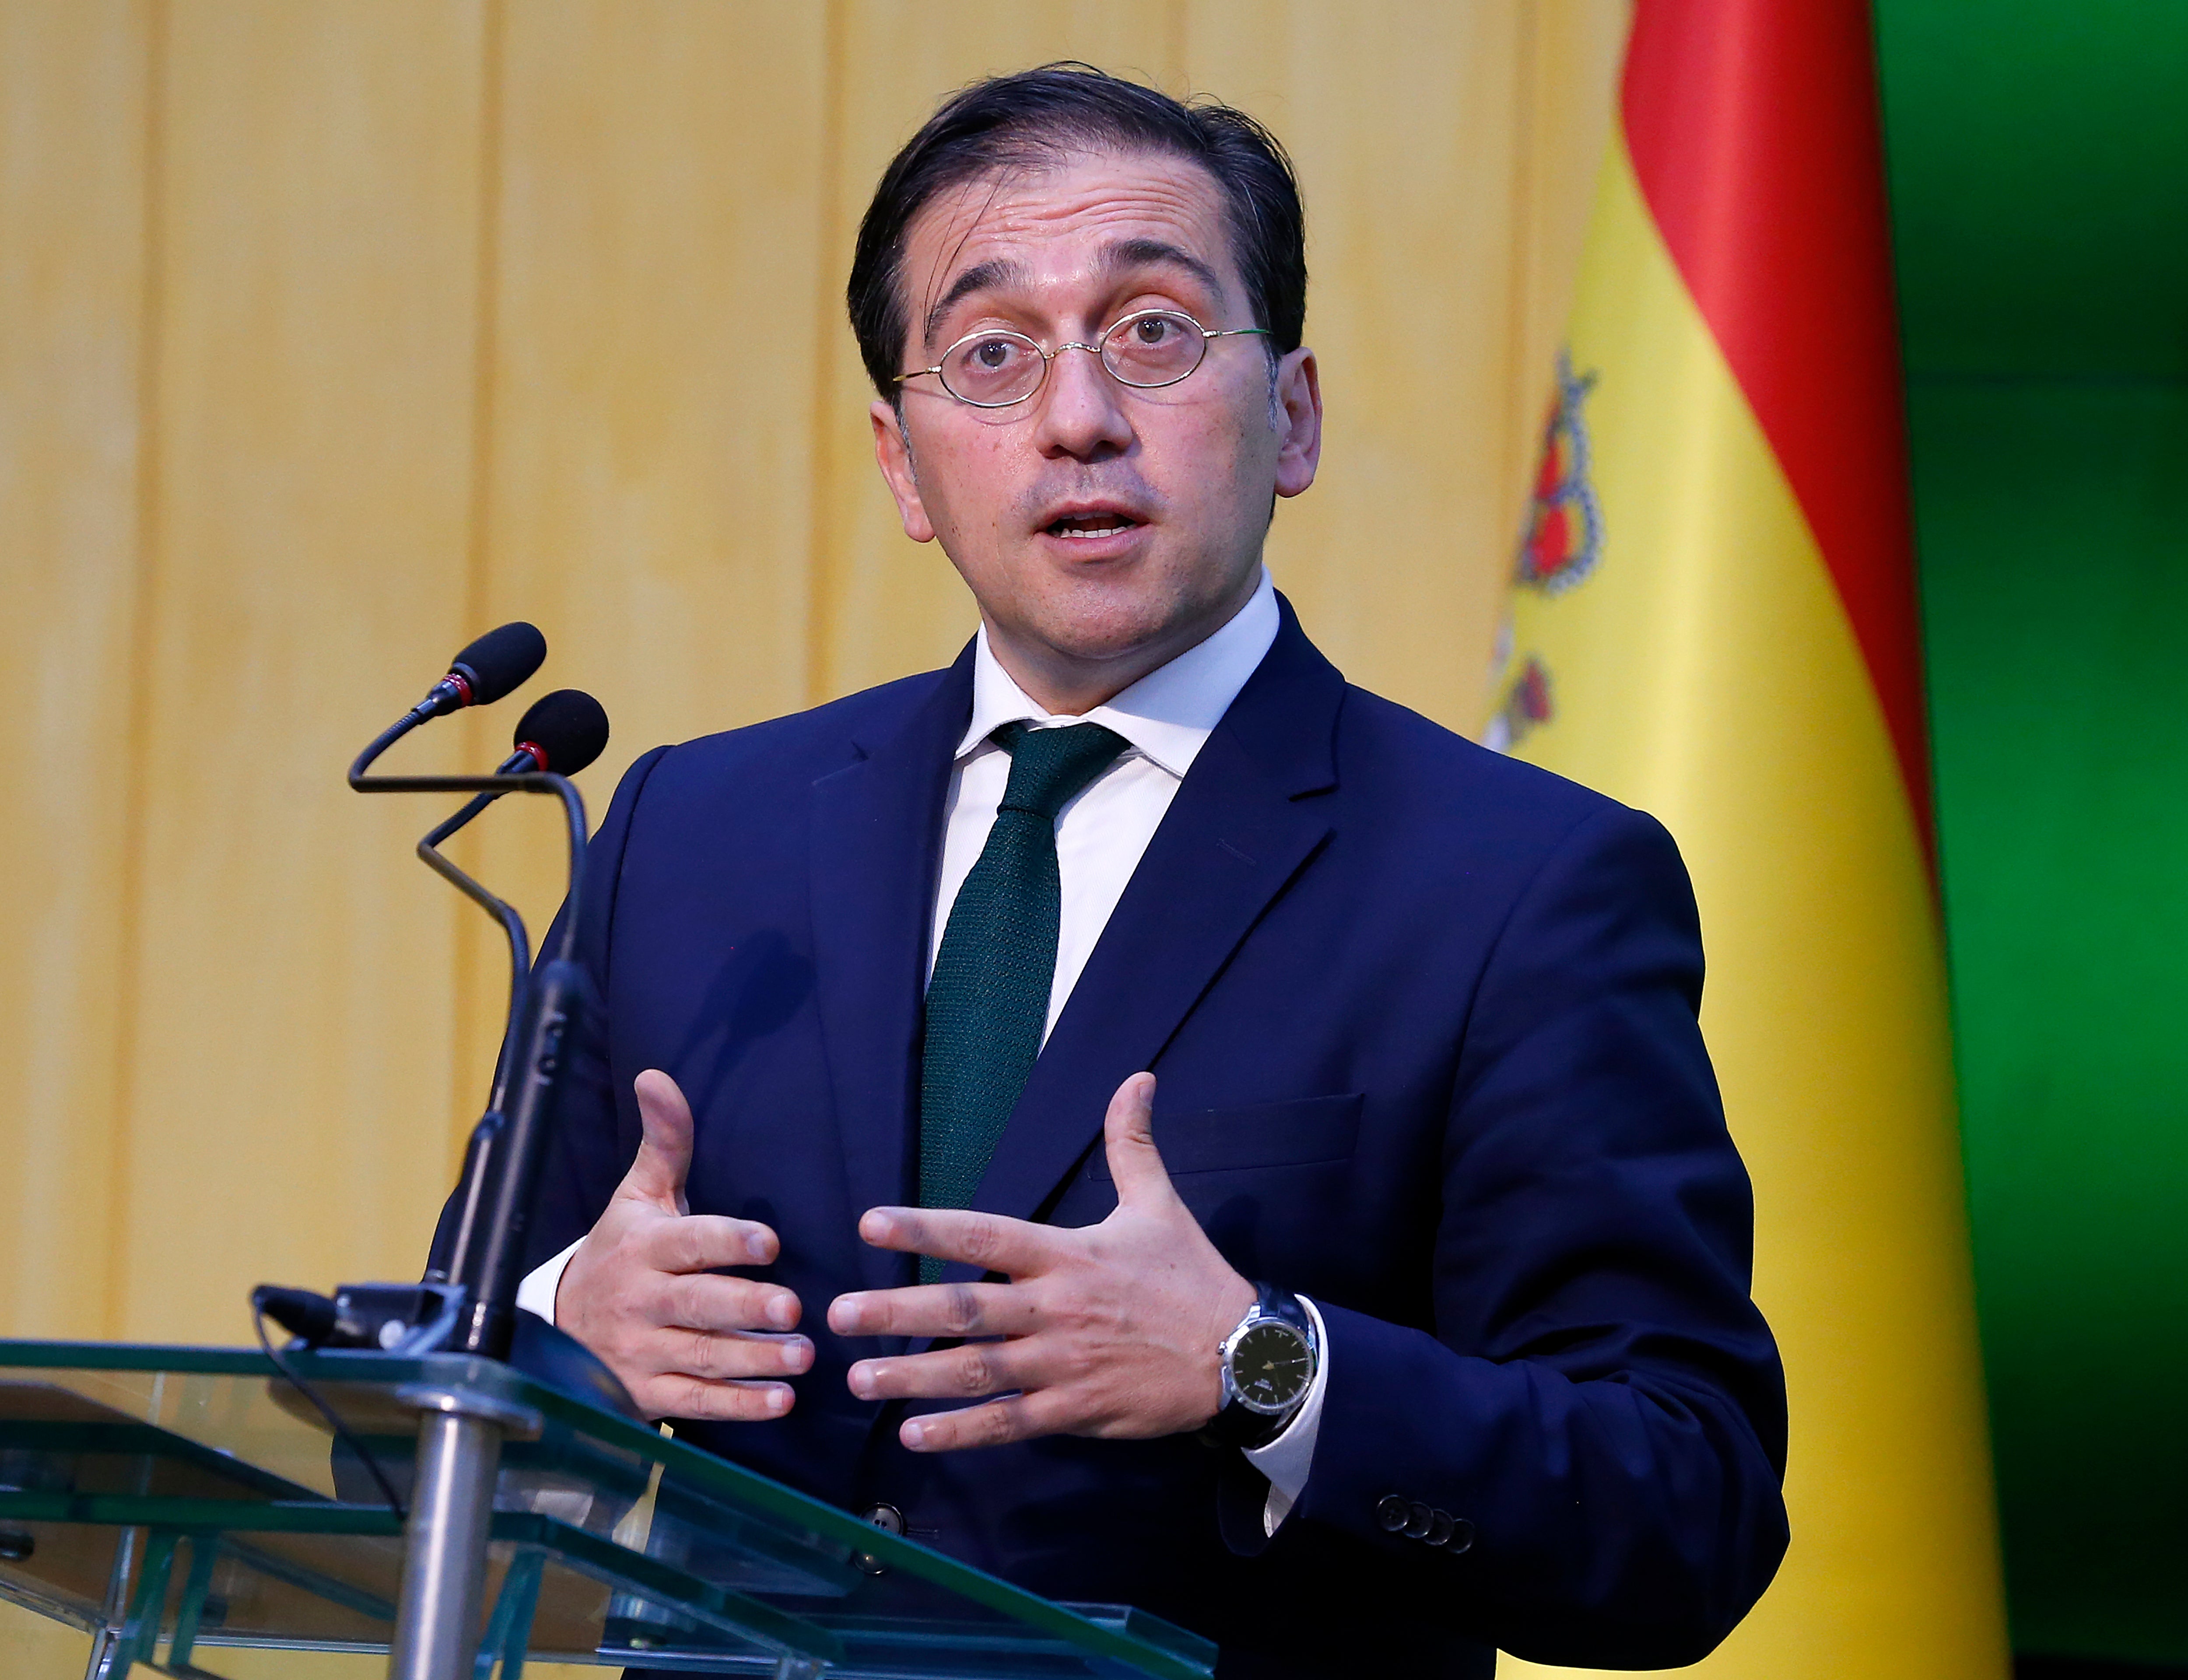 Spain’s foreign minister Jose Manuel Albares speaks in Pakistan as Spain launches a diplomatic offensive to lock its essential stream of Algerian natural gas